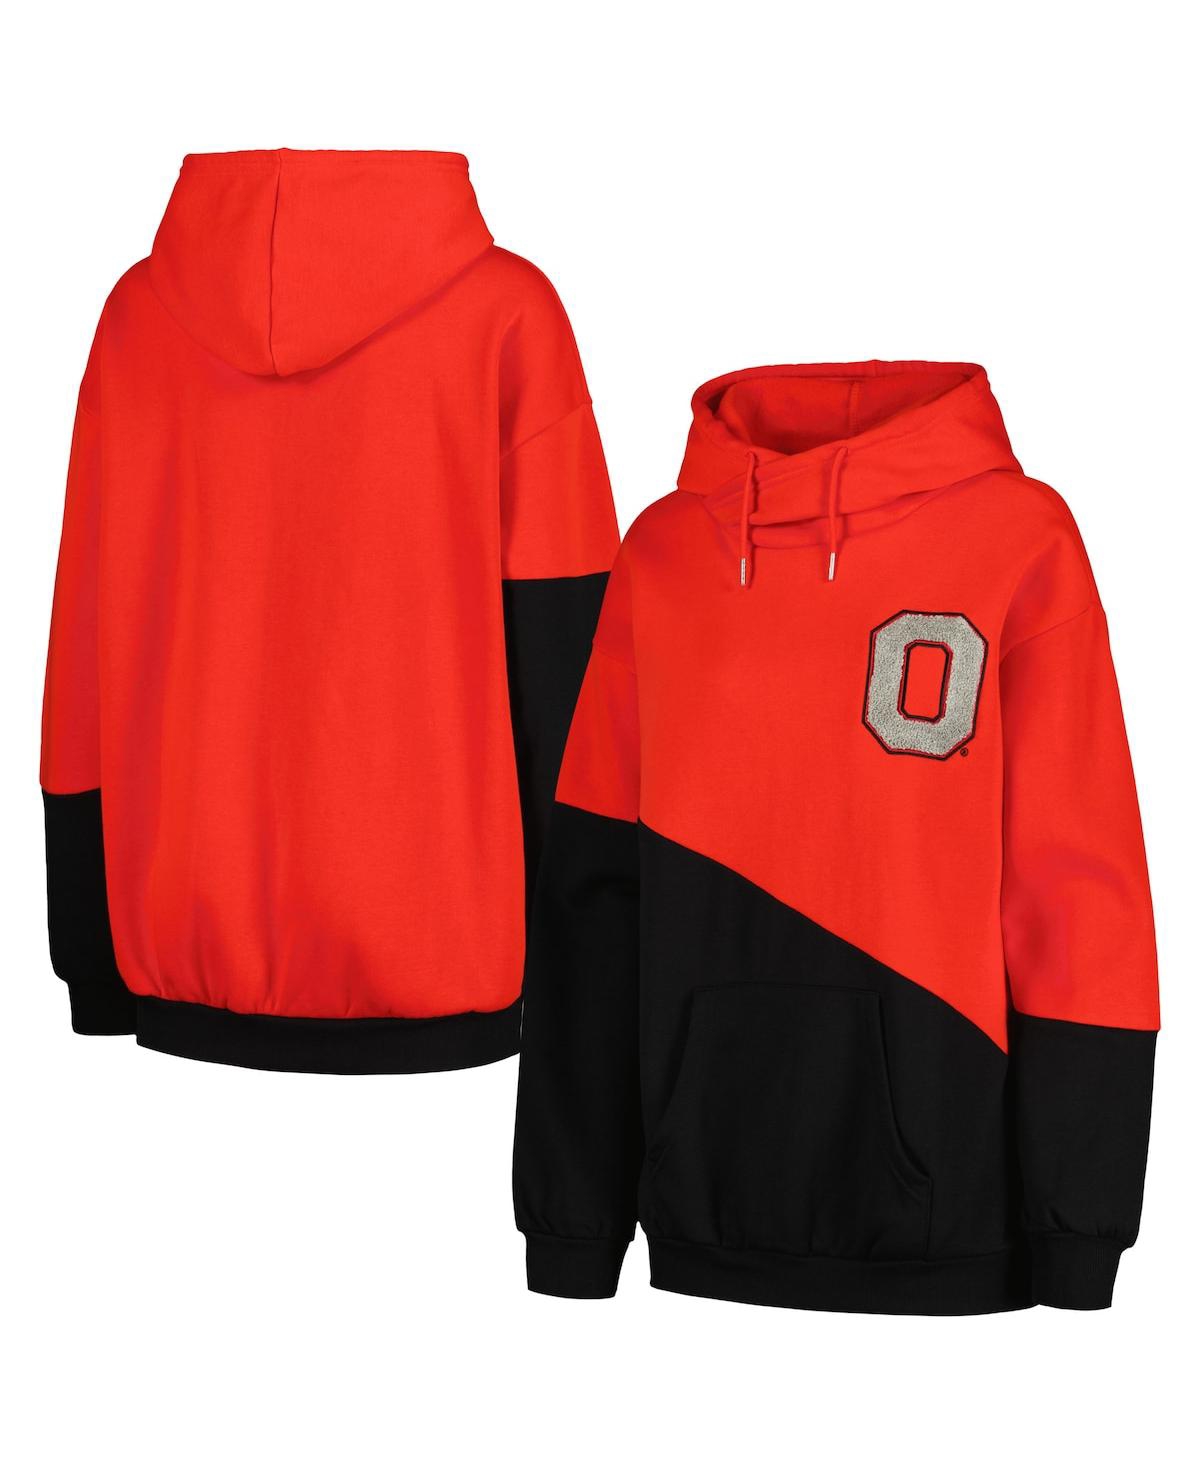 Women's Gameday Couture Scarlet, Black Ohio State Buckeyes Matchmaker Diagonal Cowl Pullover Hoodie - Scarlet, Black